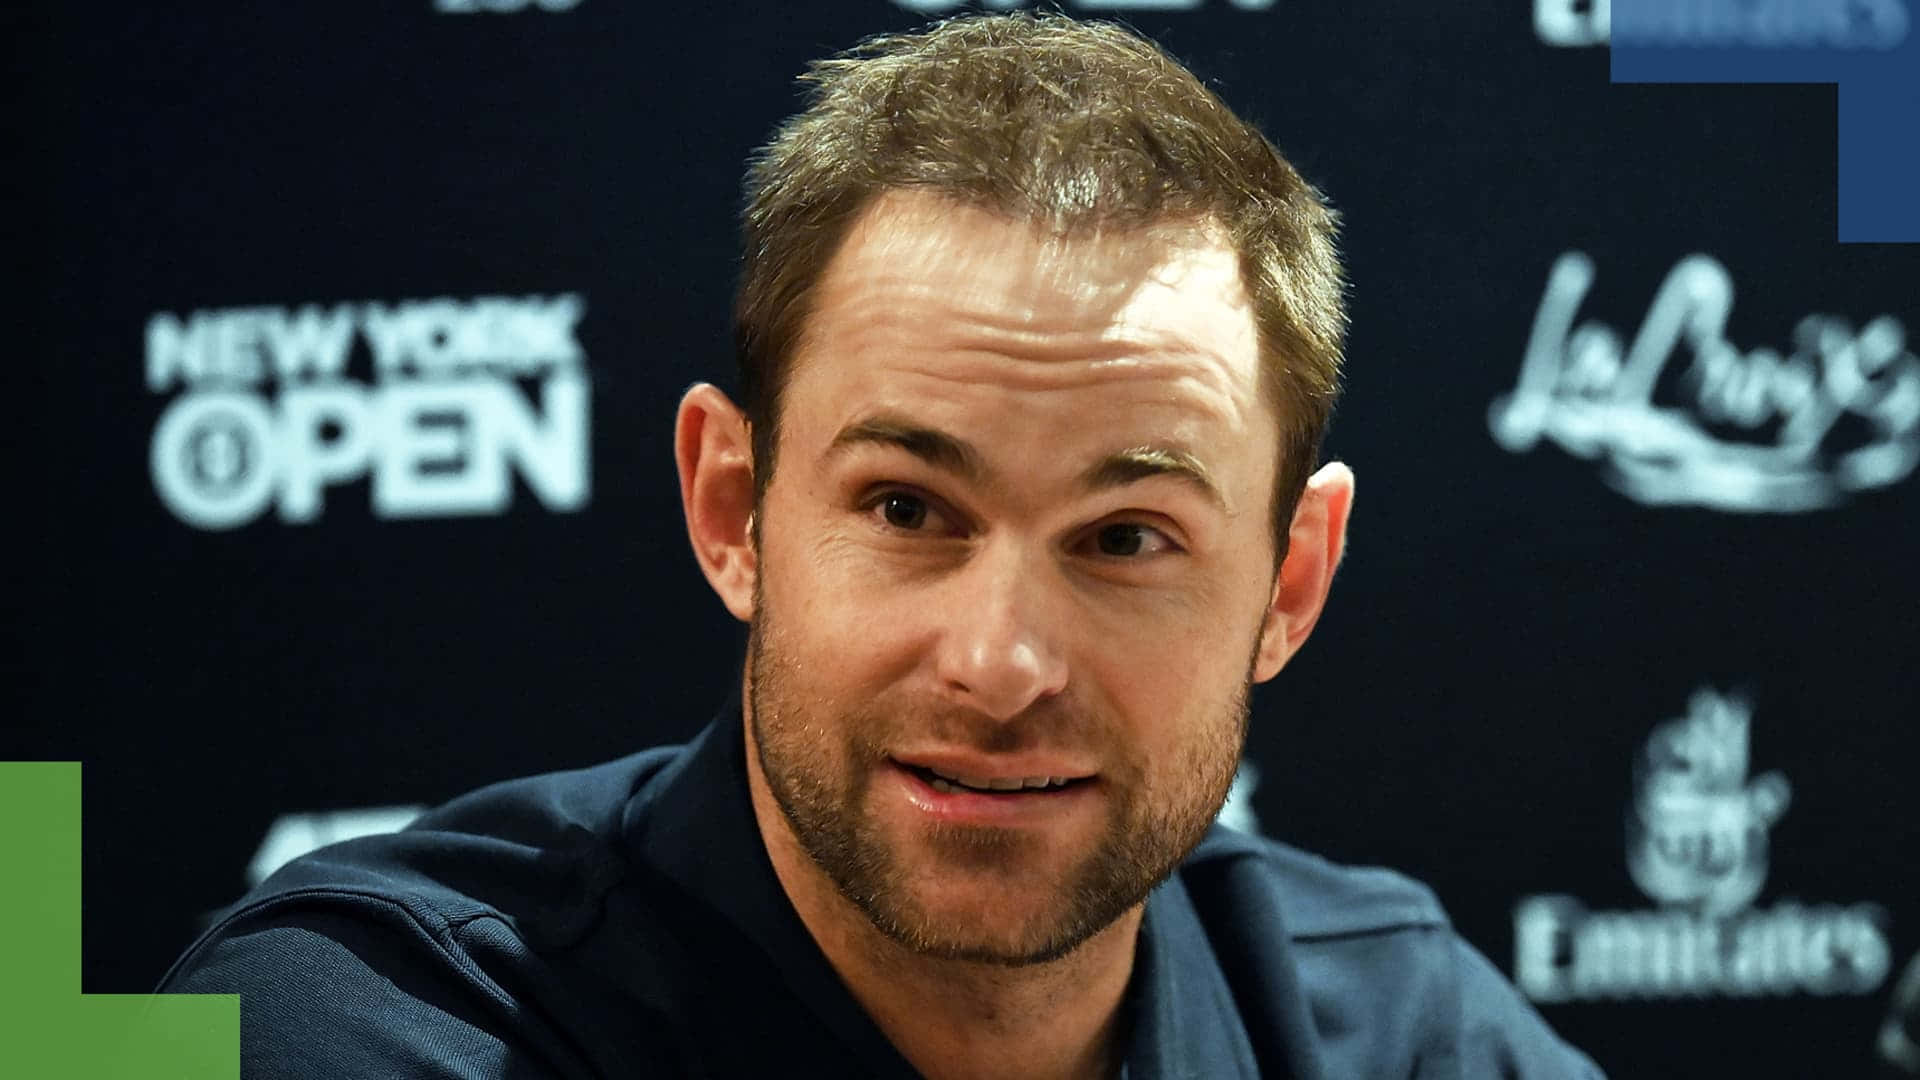 Andy Roddick Smiling During Interview Wallpaper